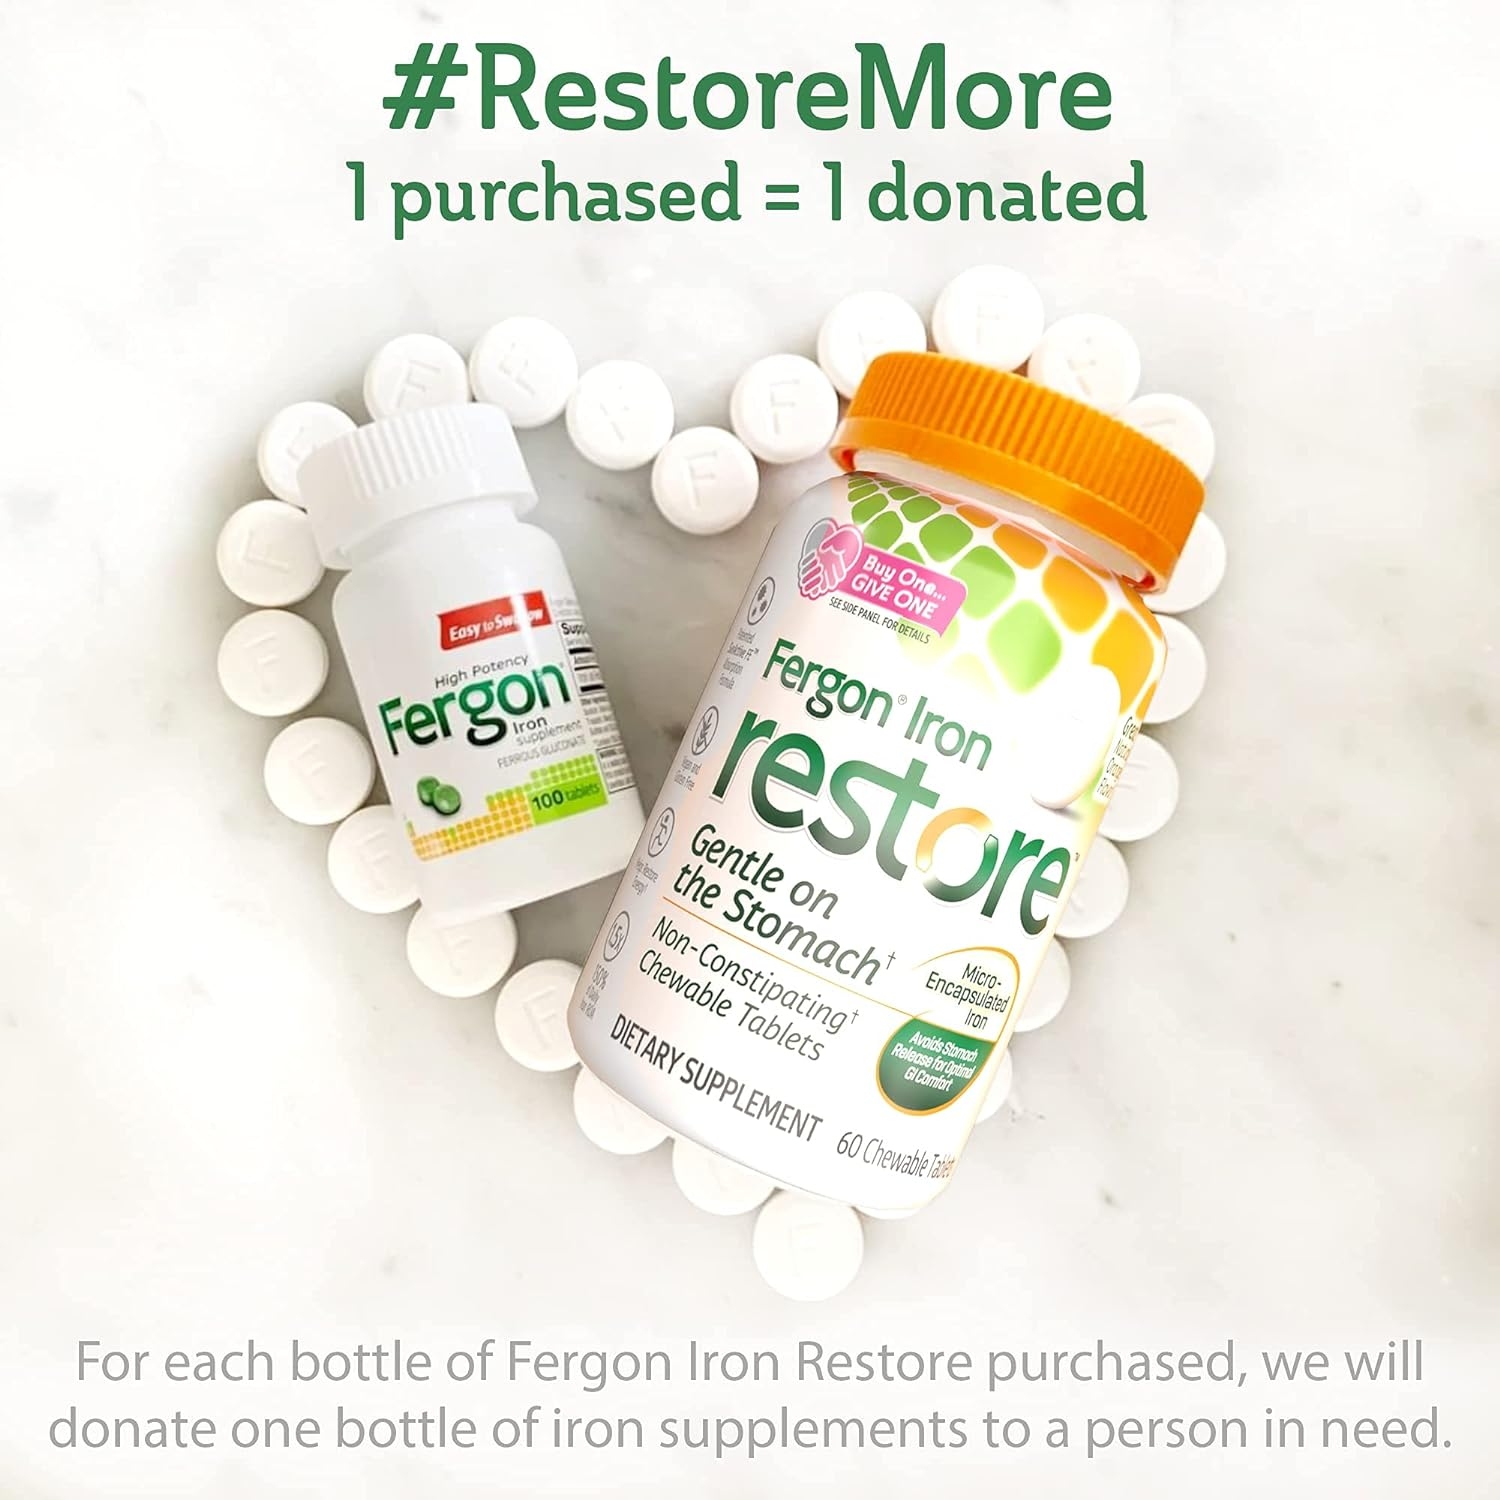 Fergon Iron Restore Chewable Tablets | 27mg of Iron, 150% RDV | Gentle Iron Supplement | Vegan | No Metallic Aftertaste | Replenish Iron Levels to Help Fight Fatigue and Boost Energy | 60 Tablets